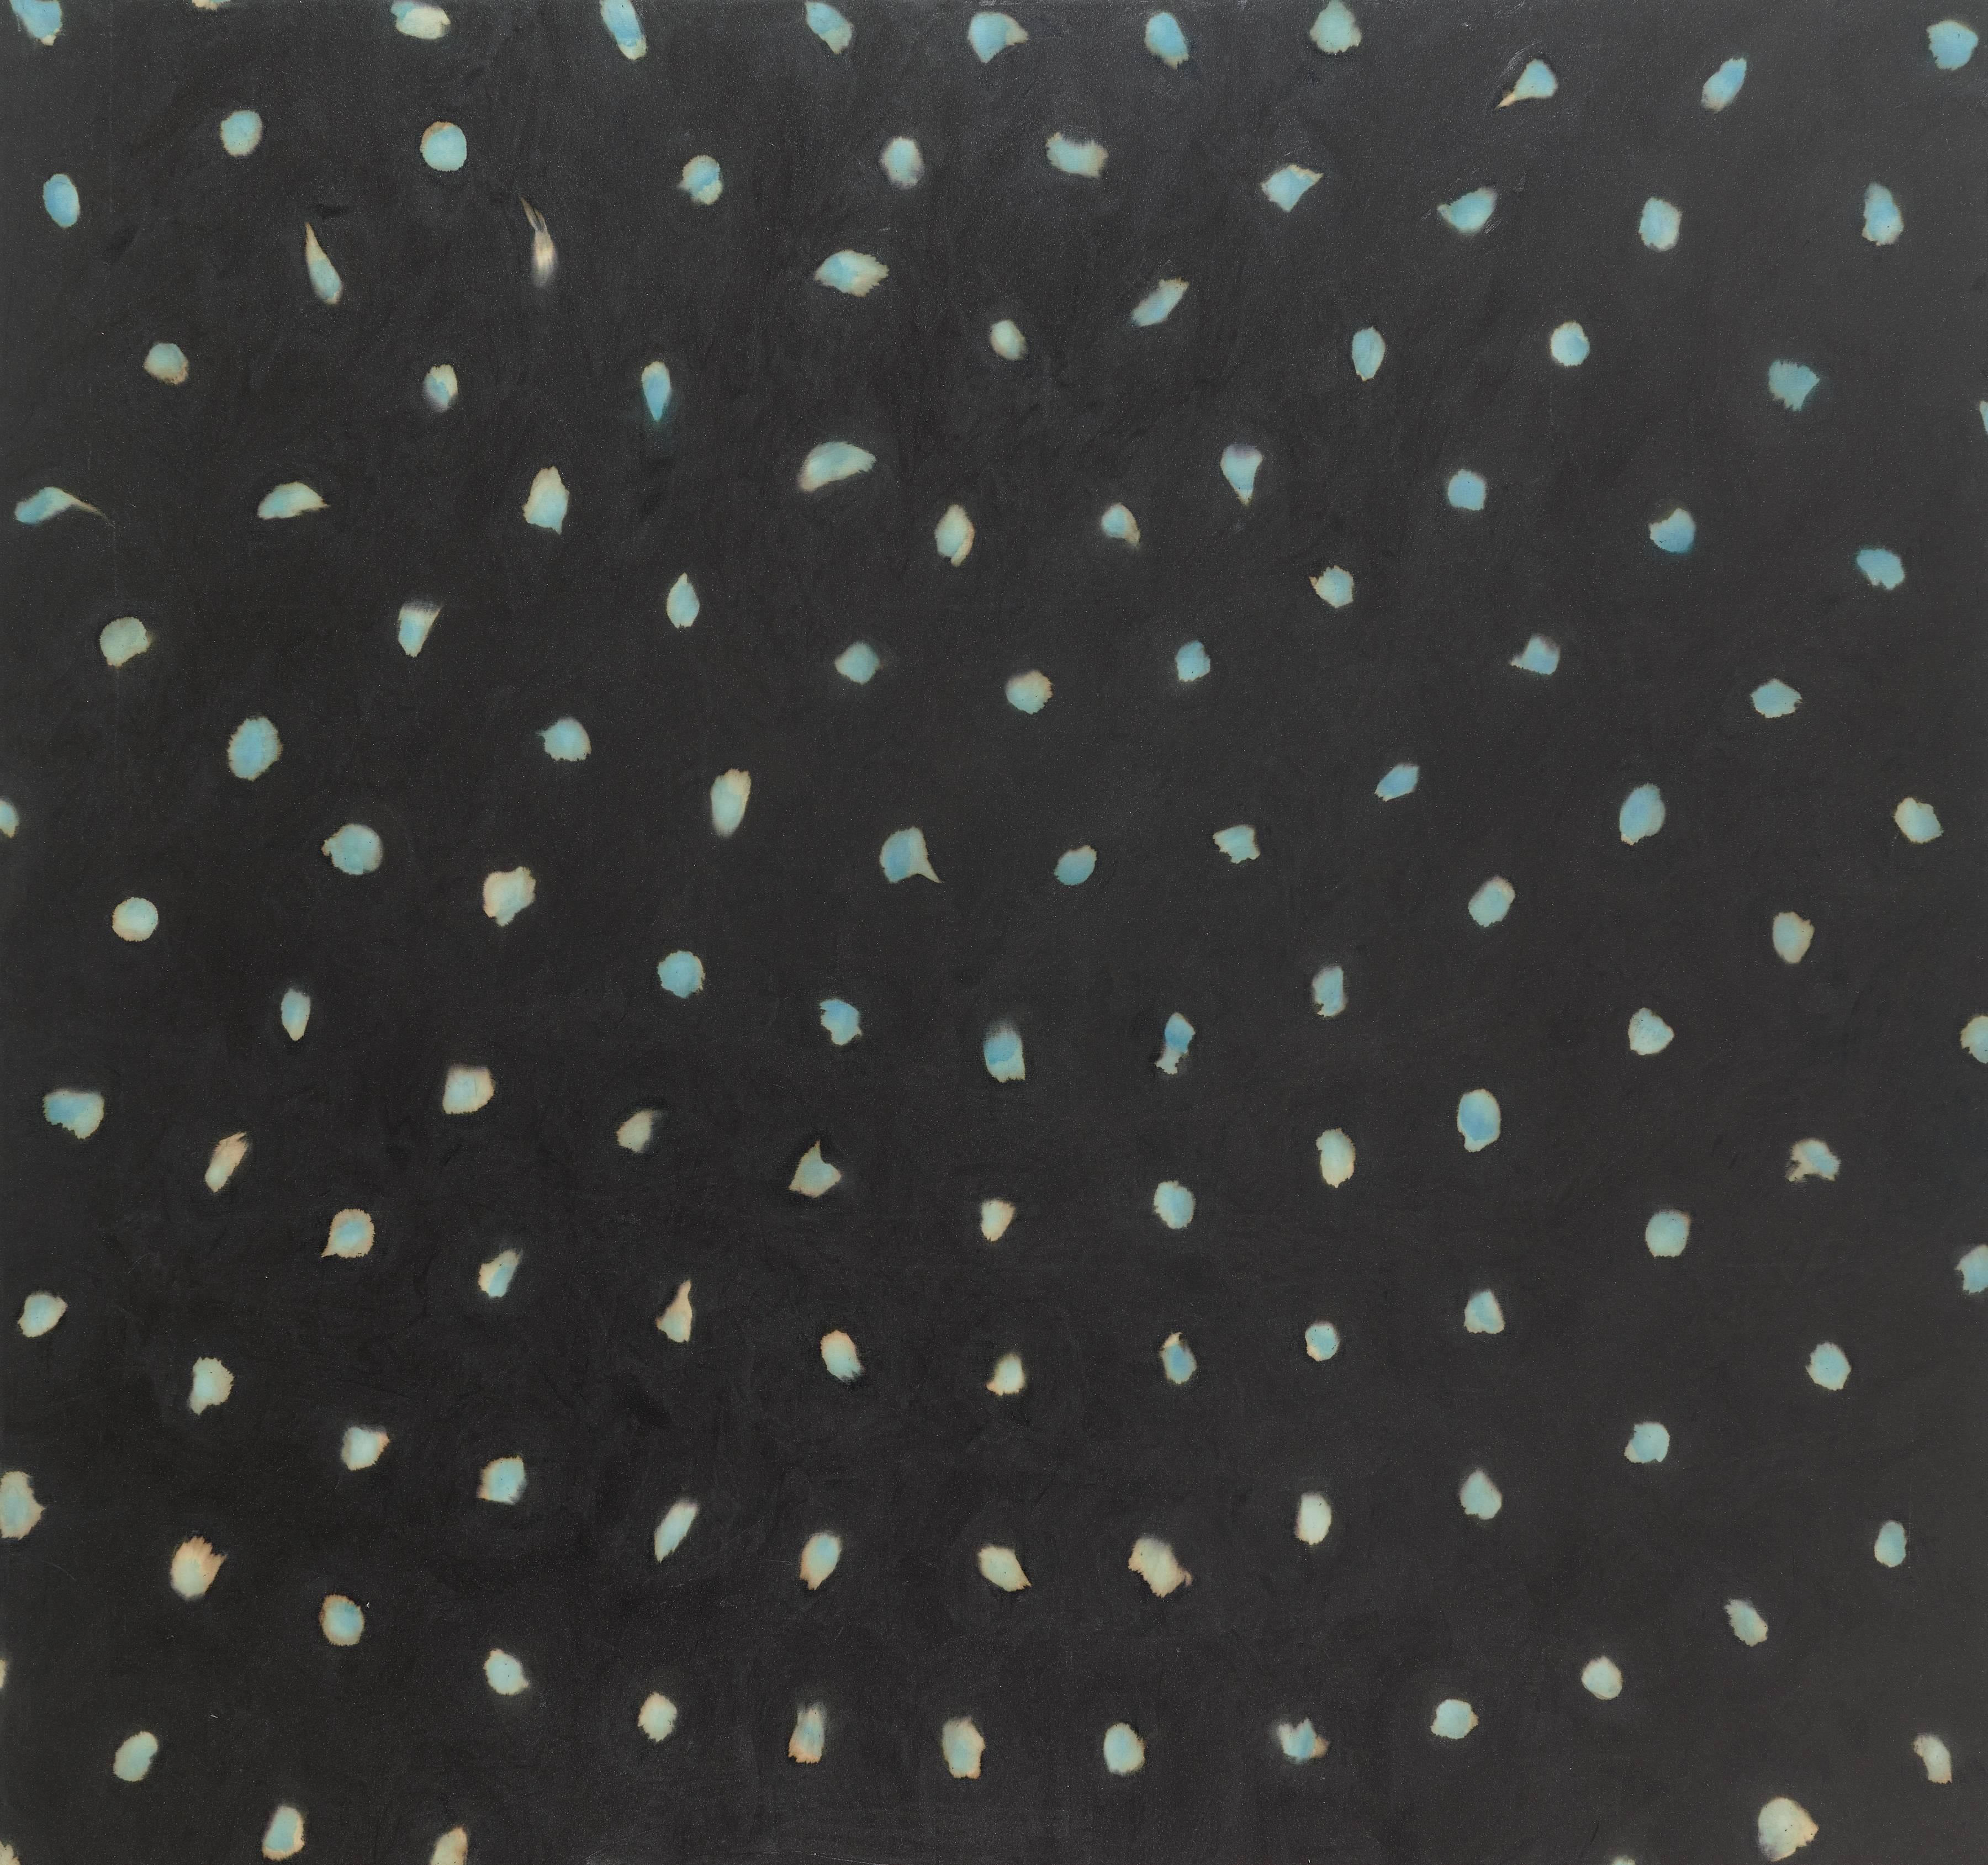 Dome - Painting by Ross Bleckner